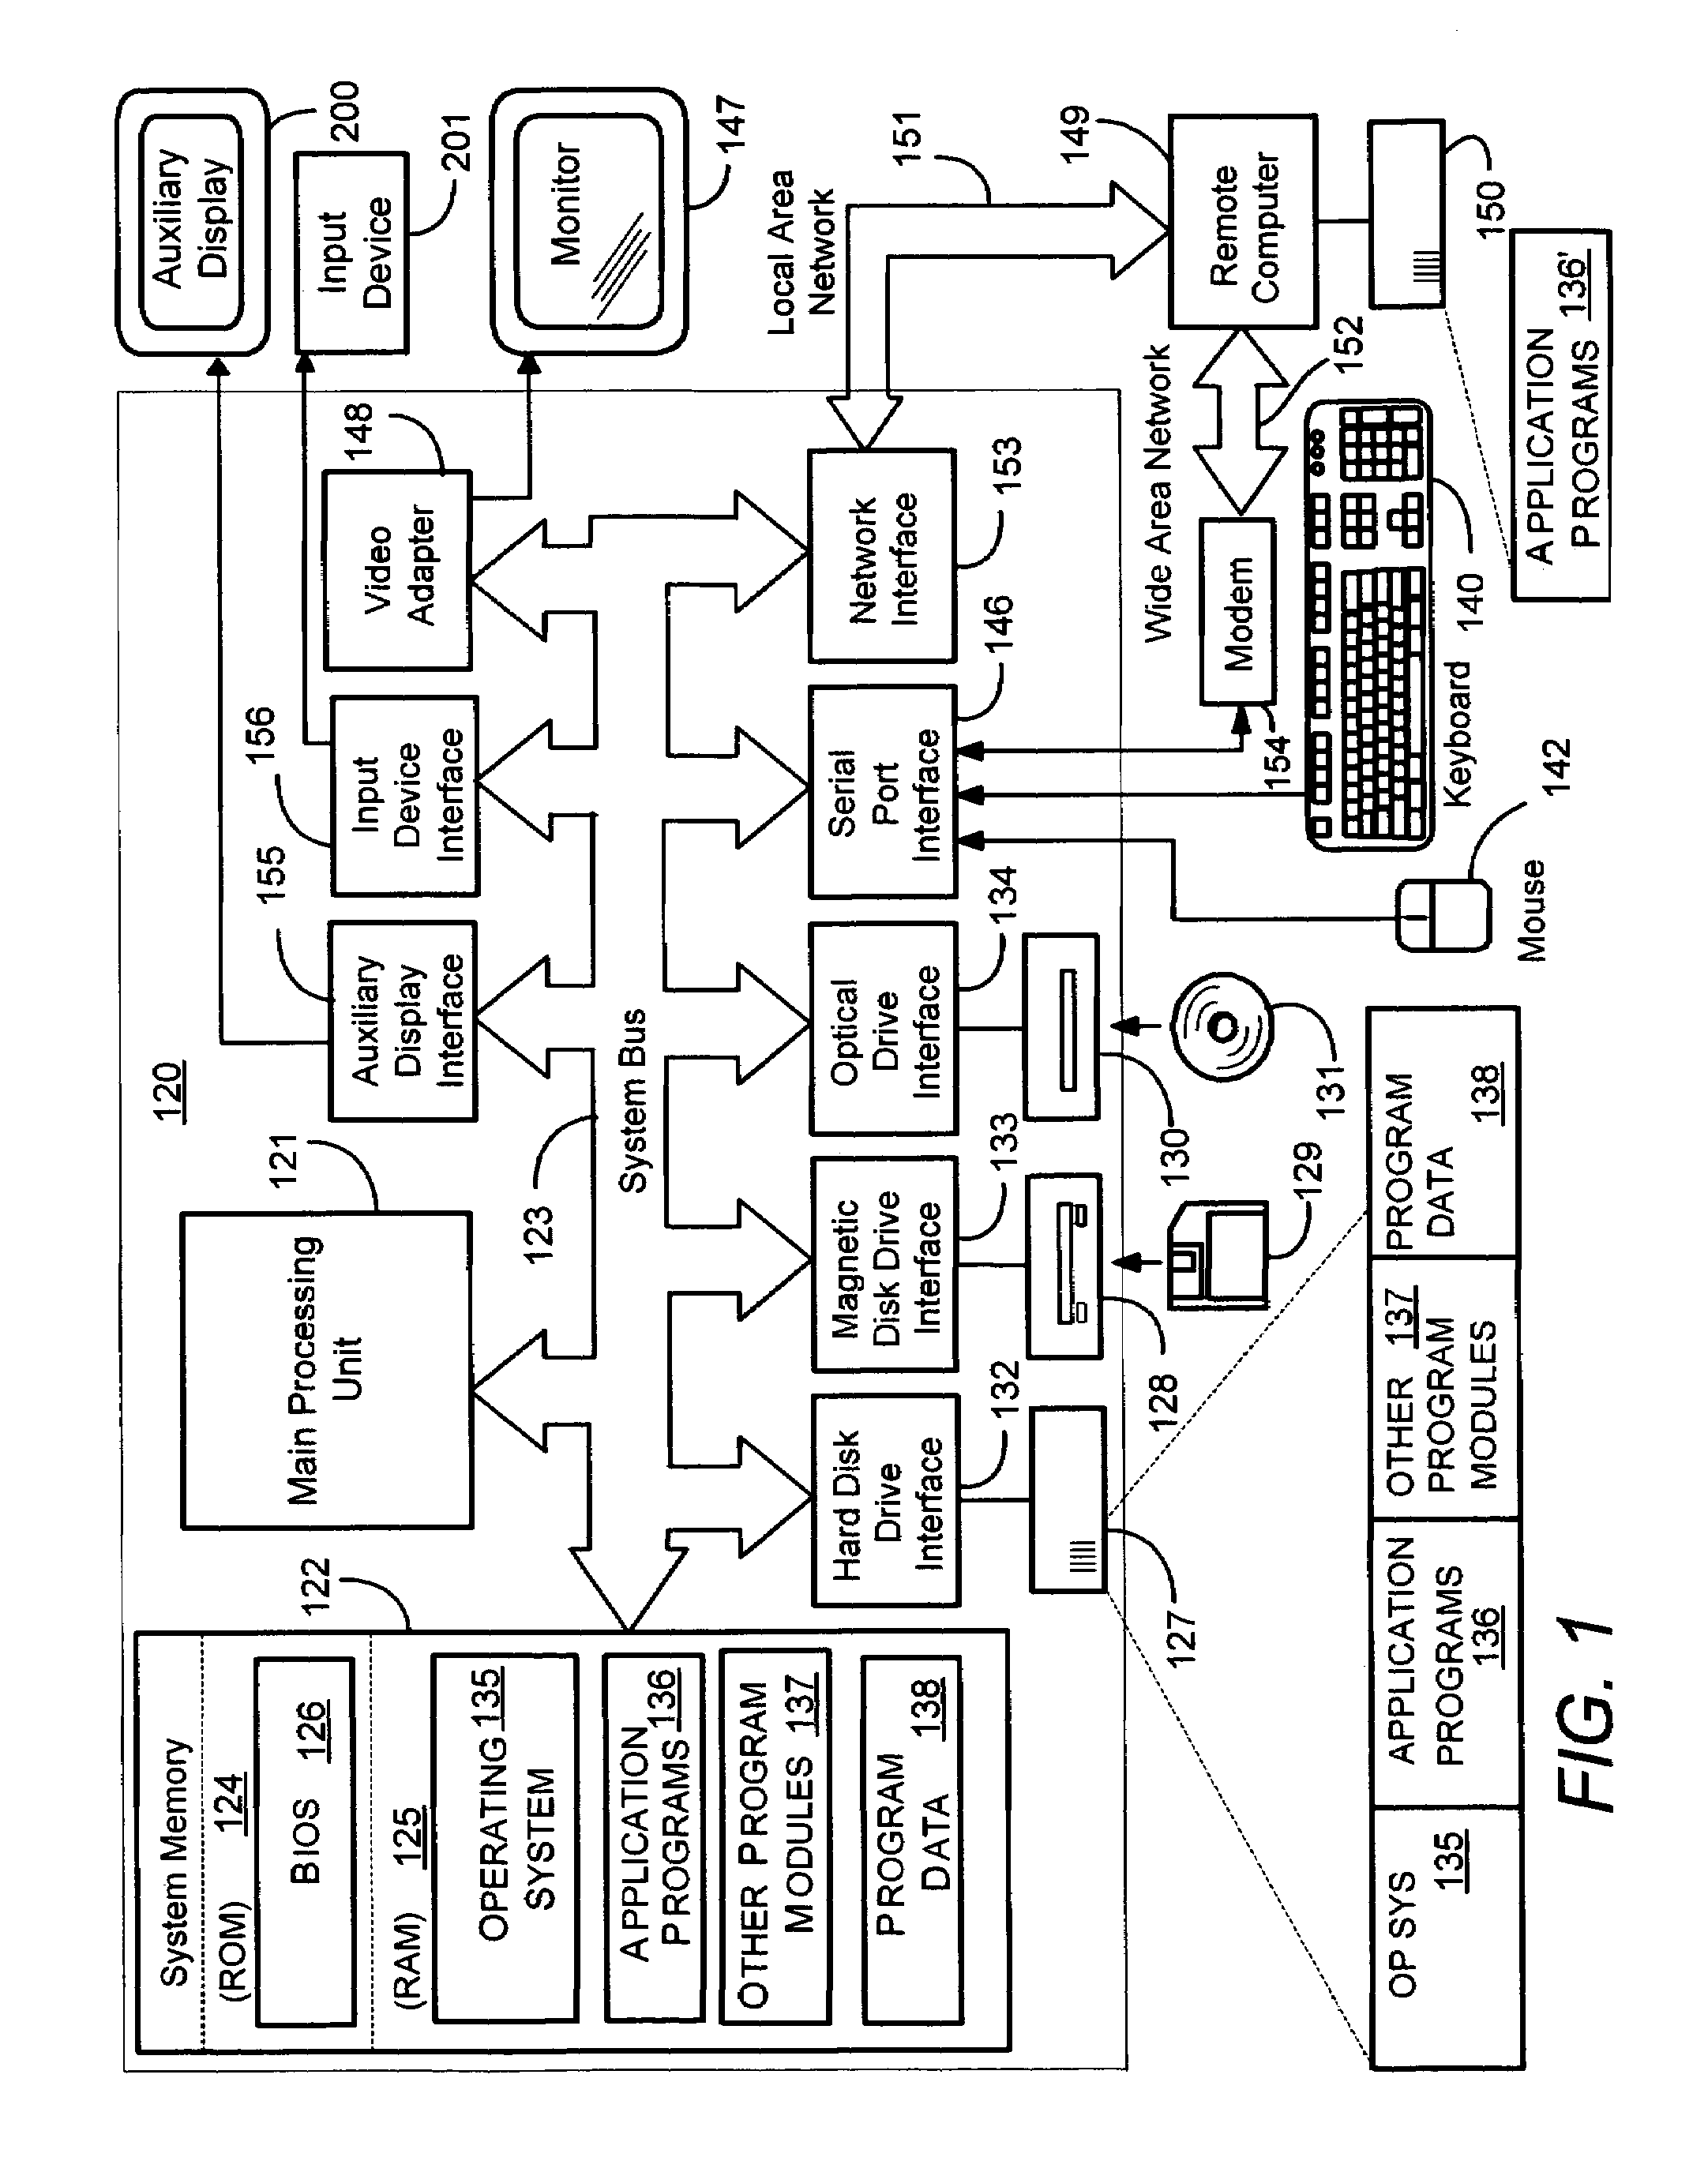 Context-aware auxiliary display platform and applications